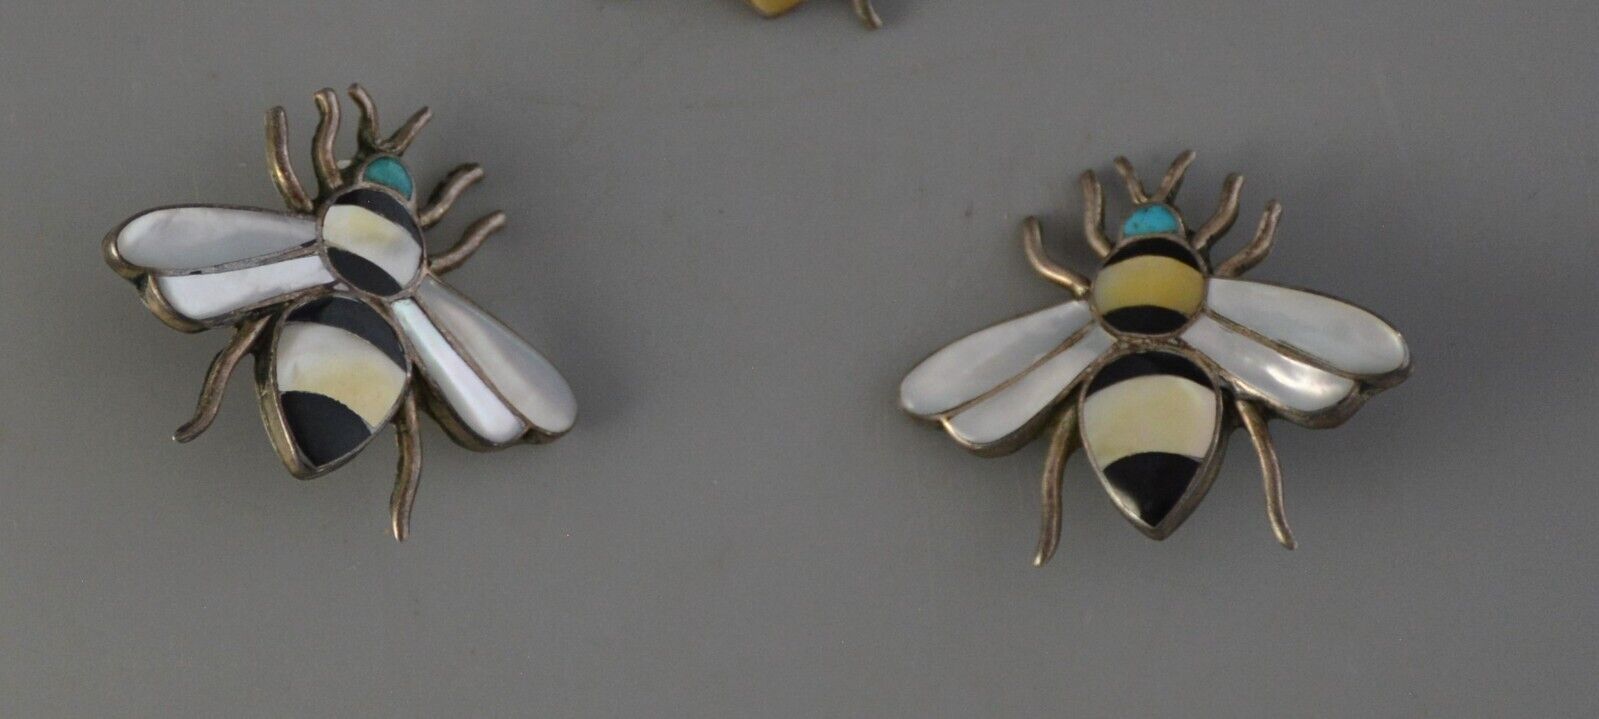 Vintage Zuni Indian Silver Inlay Clasp Earrings - Bumble Bees - 1